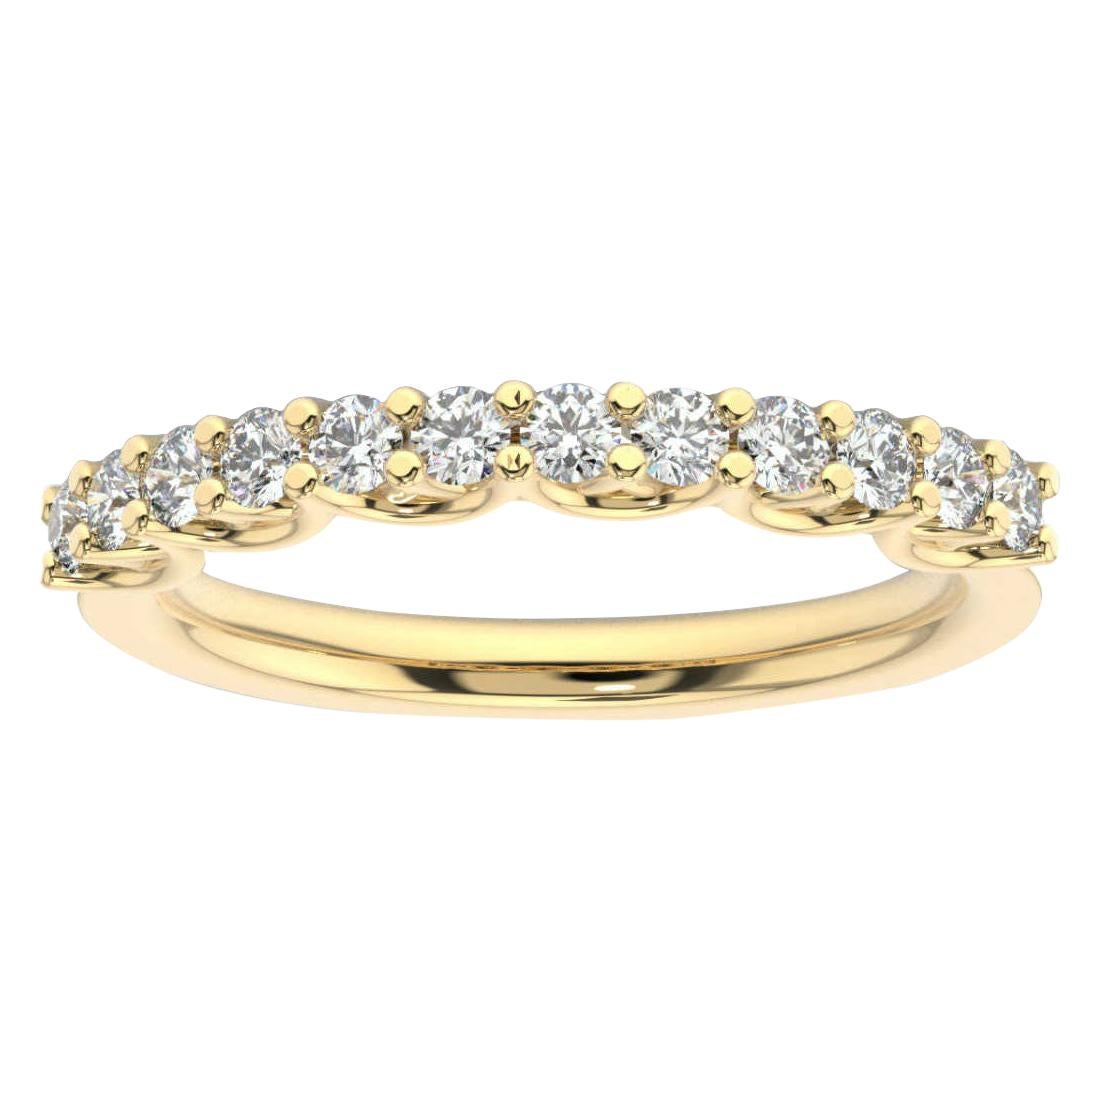 14K Yellow Gold Olbia Diamond Ring '1/2 Ct. Tw' For Sale